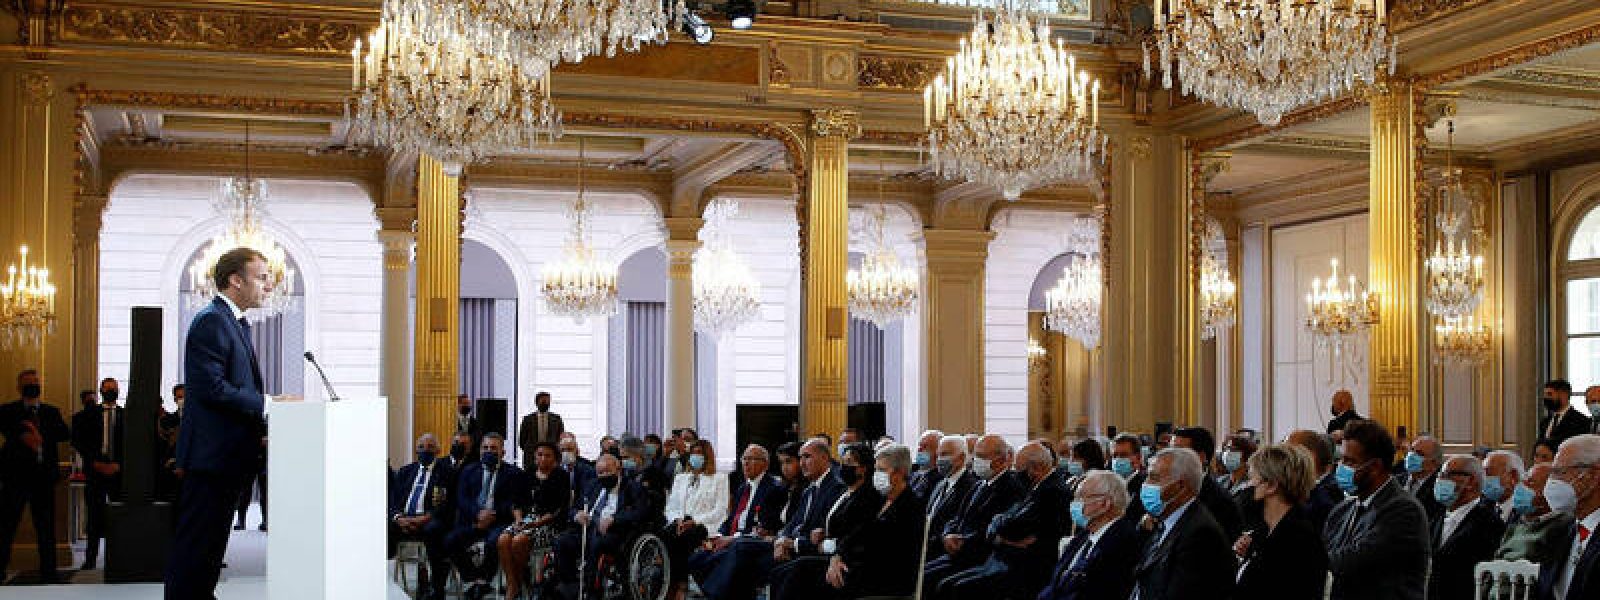 French president Emmanuel Macron delivers a speech during a ceremony in memory of the Harkis, Algerians who helped the French Army in the Algerian War of Independence, at the Elysee Palace in Paris, on September 20, 2021. (Photo by GONZALO FUENTES / POOL / AFP)